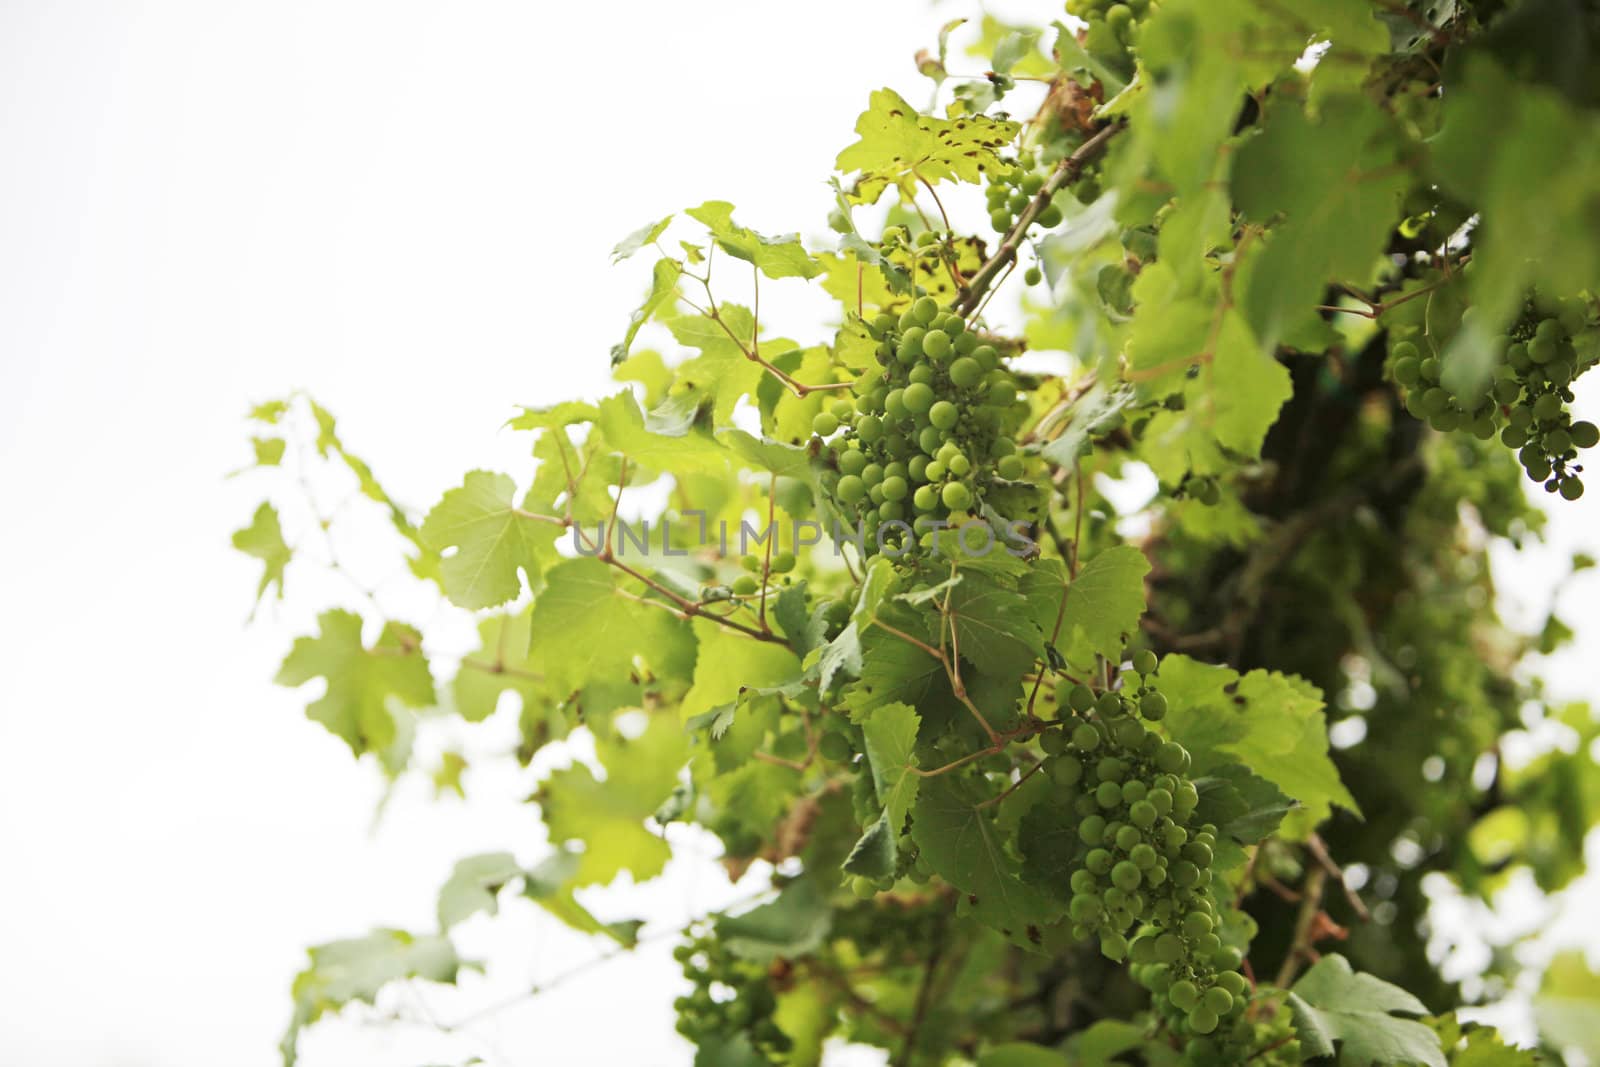 Many wine grapes hanging on a vine - landscape format with Copy Space 